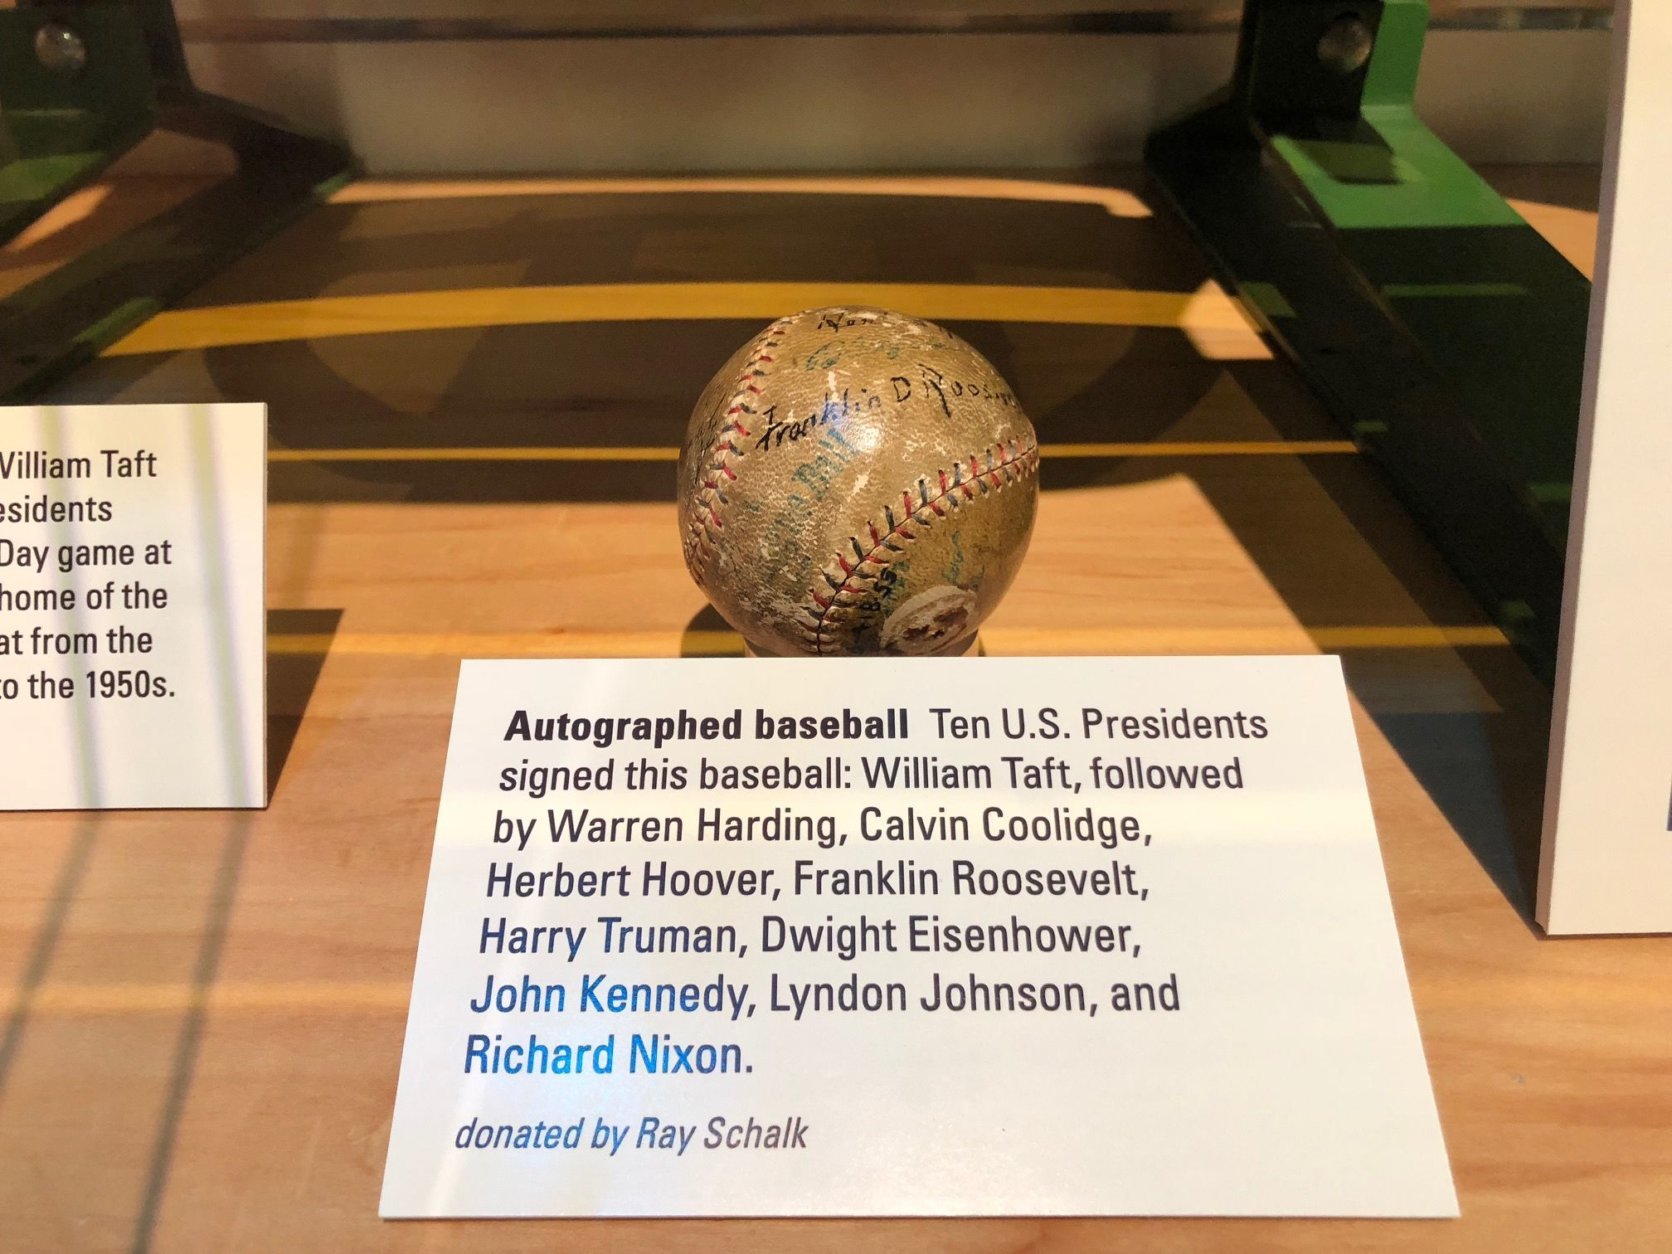 "We really don't bring stuff out from Cooperstown much,” said Erik Strohl, vice president of exhibitions and collections at the National Baseball Hall of Fame and Museum. “... This is the only event pretty much every year where we bring Cooperstown to the people." (WTOP/John Aaron)